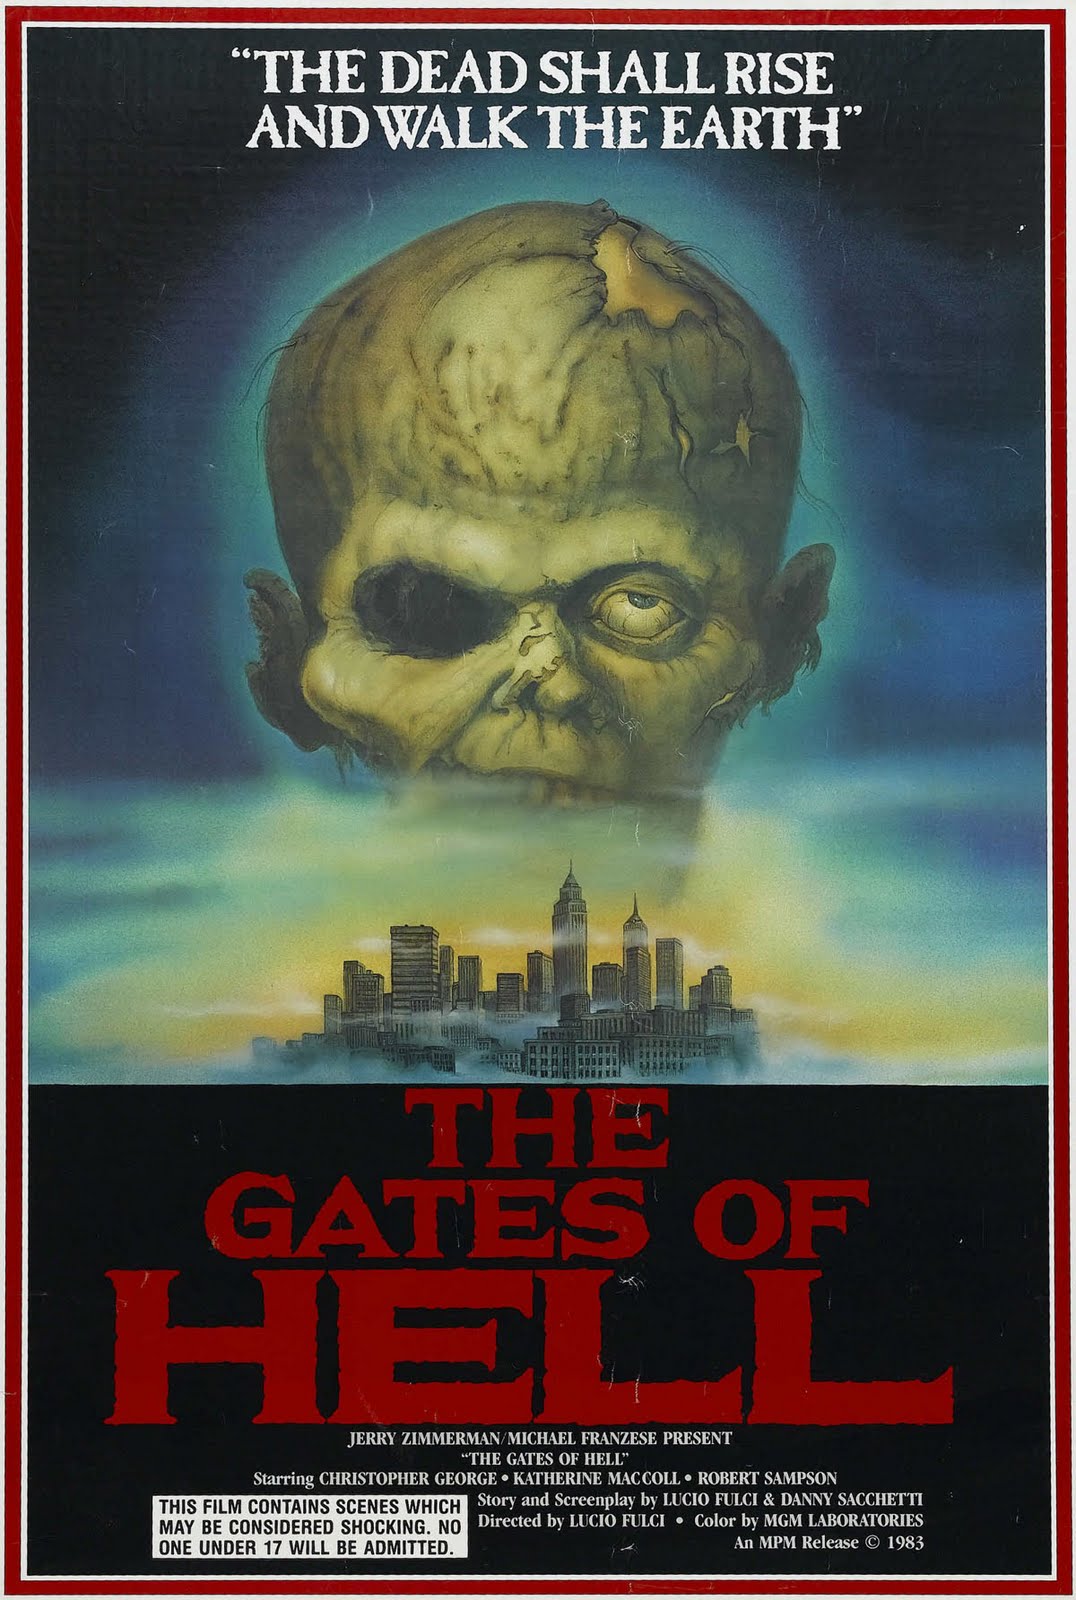 Chicago Ghouls: LUCIO FULCI: CITY OF THE LIVING DEAD (1980) CATRIONA ...